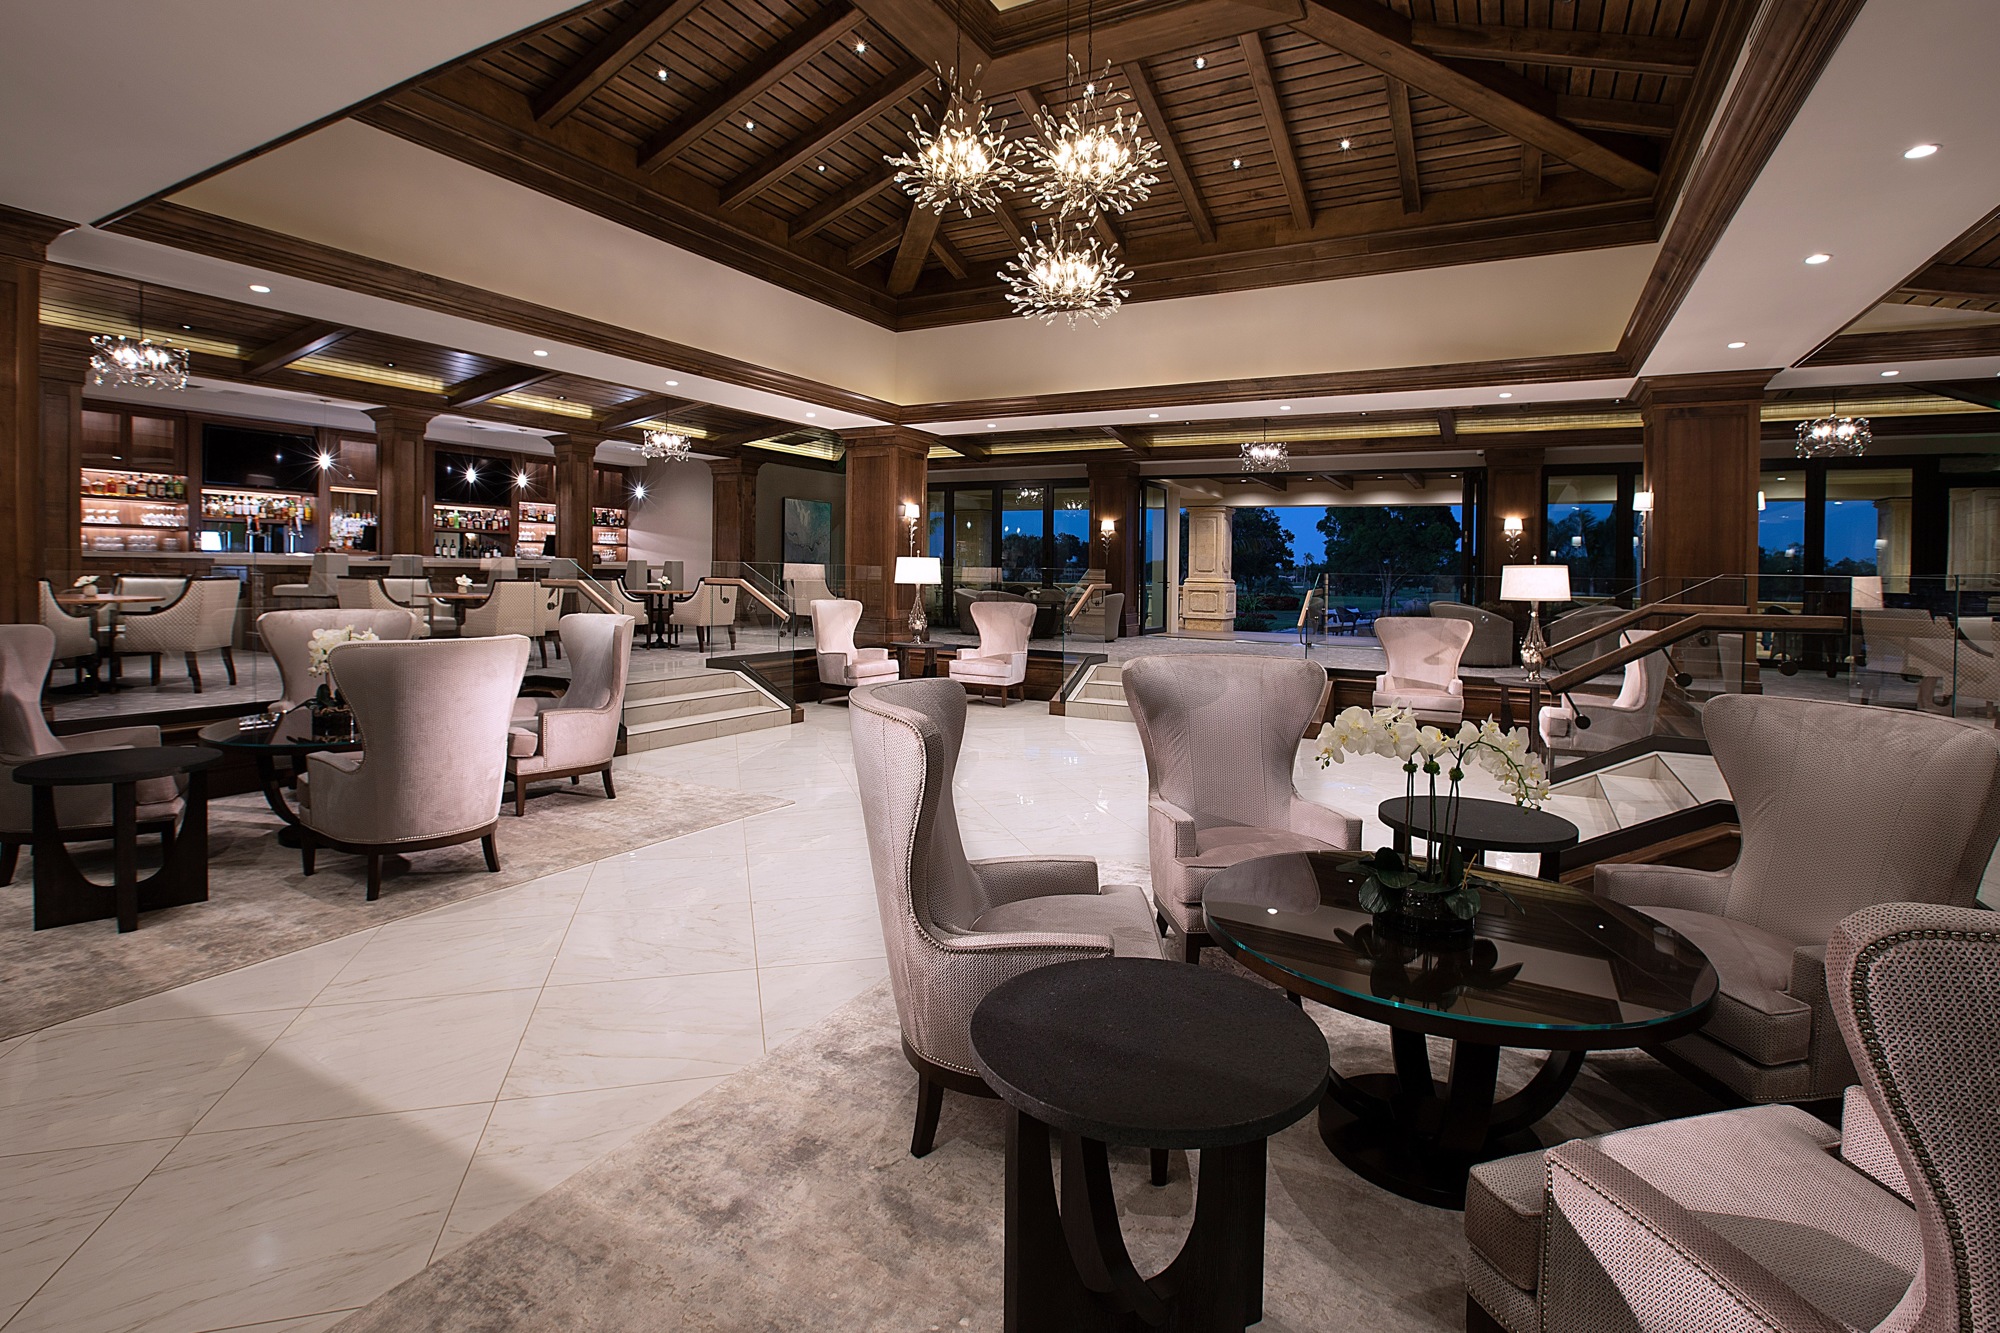 Courtesy. A multimillion-dollar renovation of the Vineyards Country Club was recently completed.